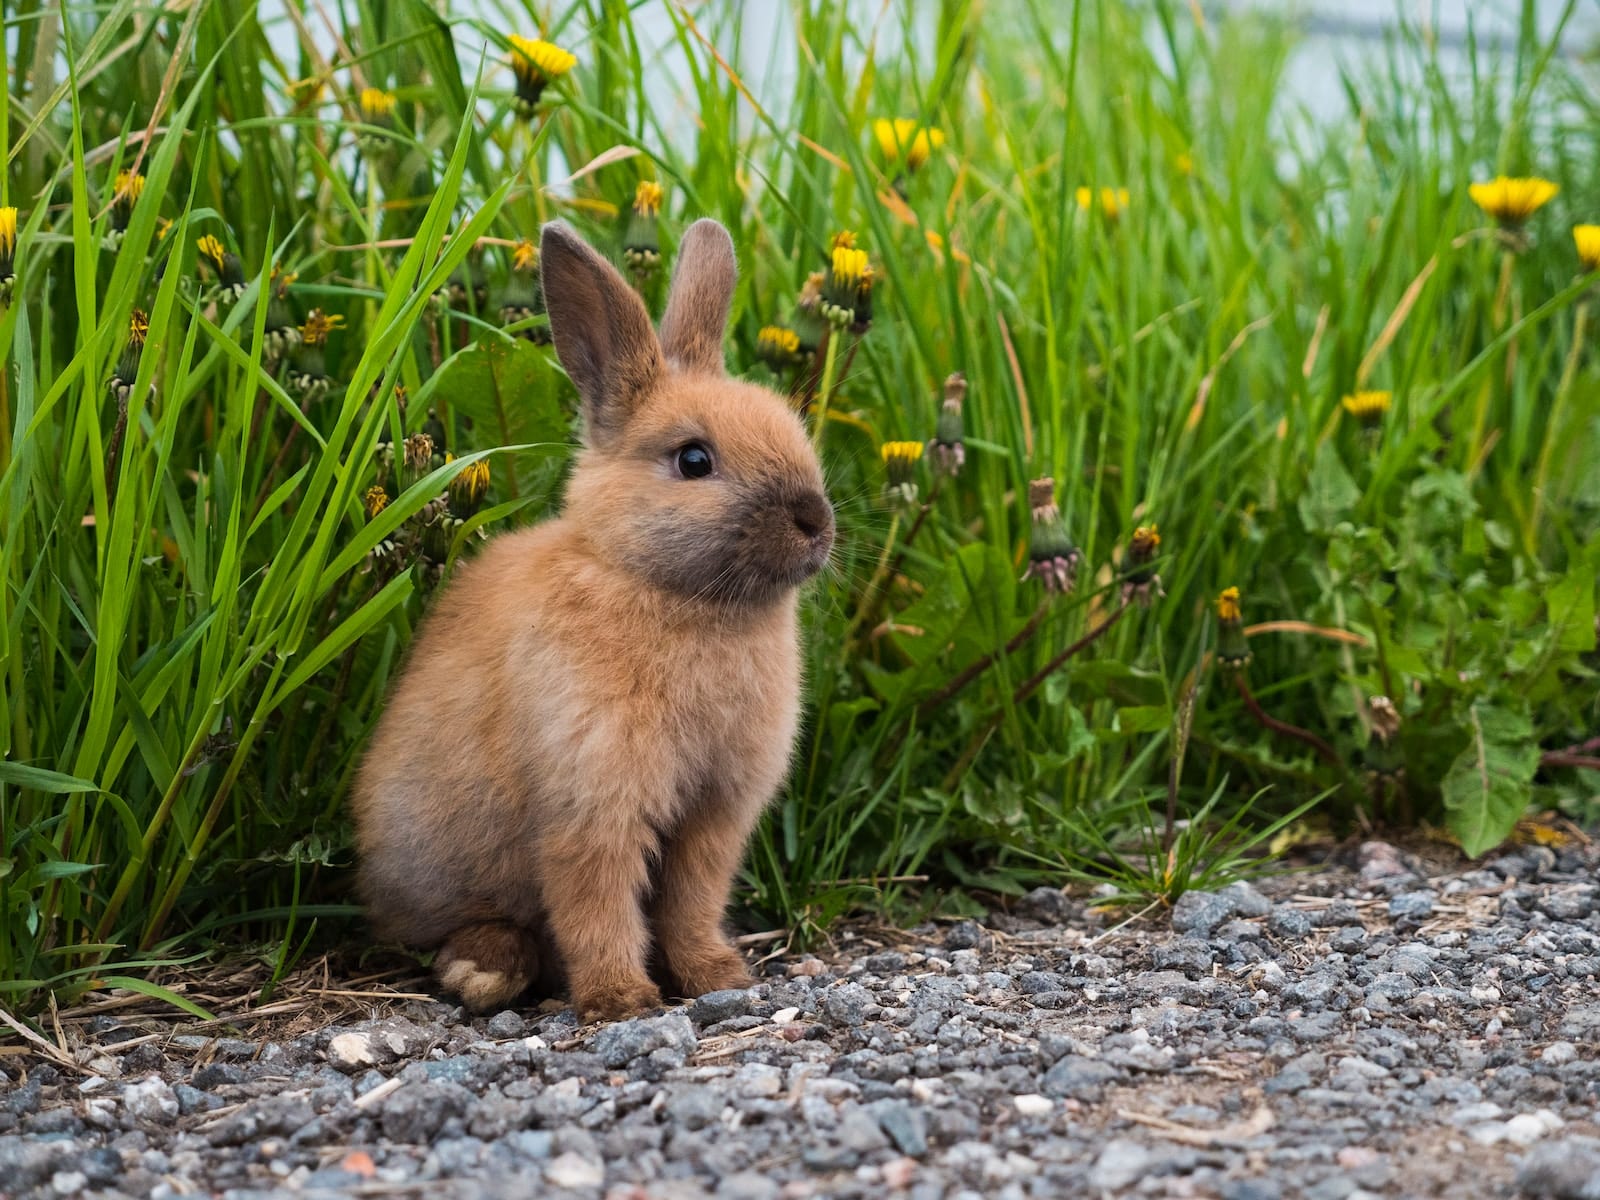 A Small Rabbit Is Sitting In The Grass